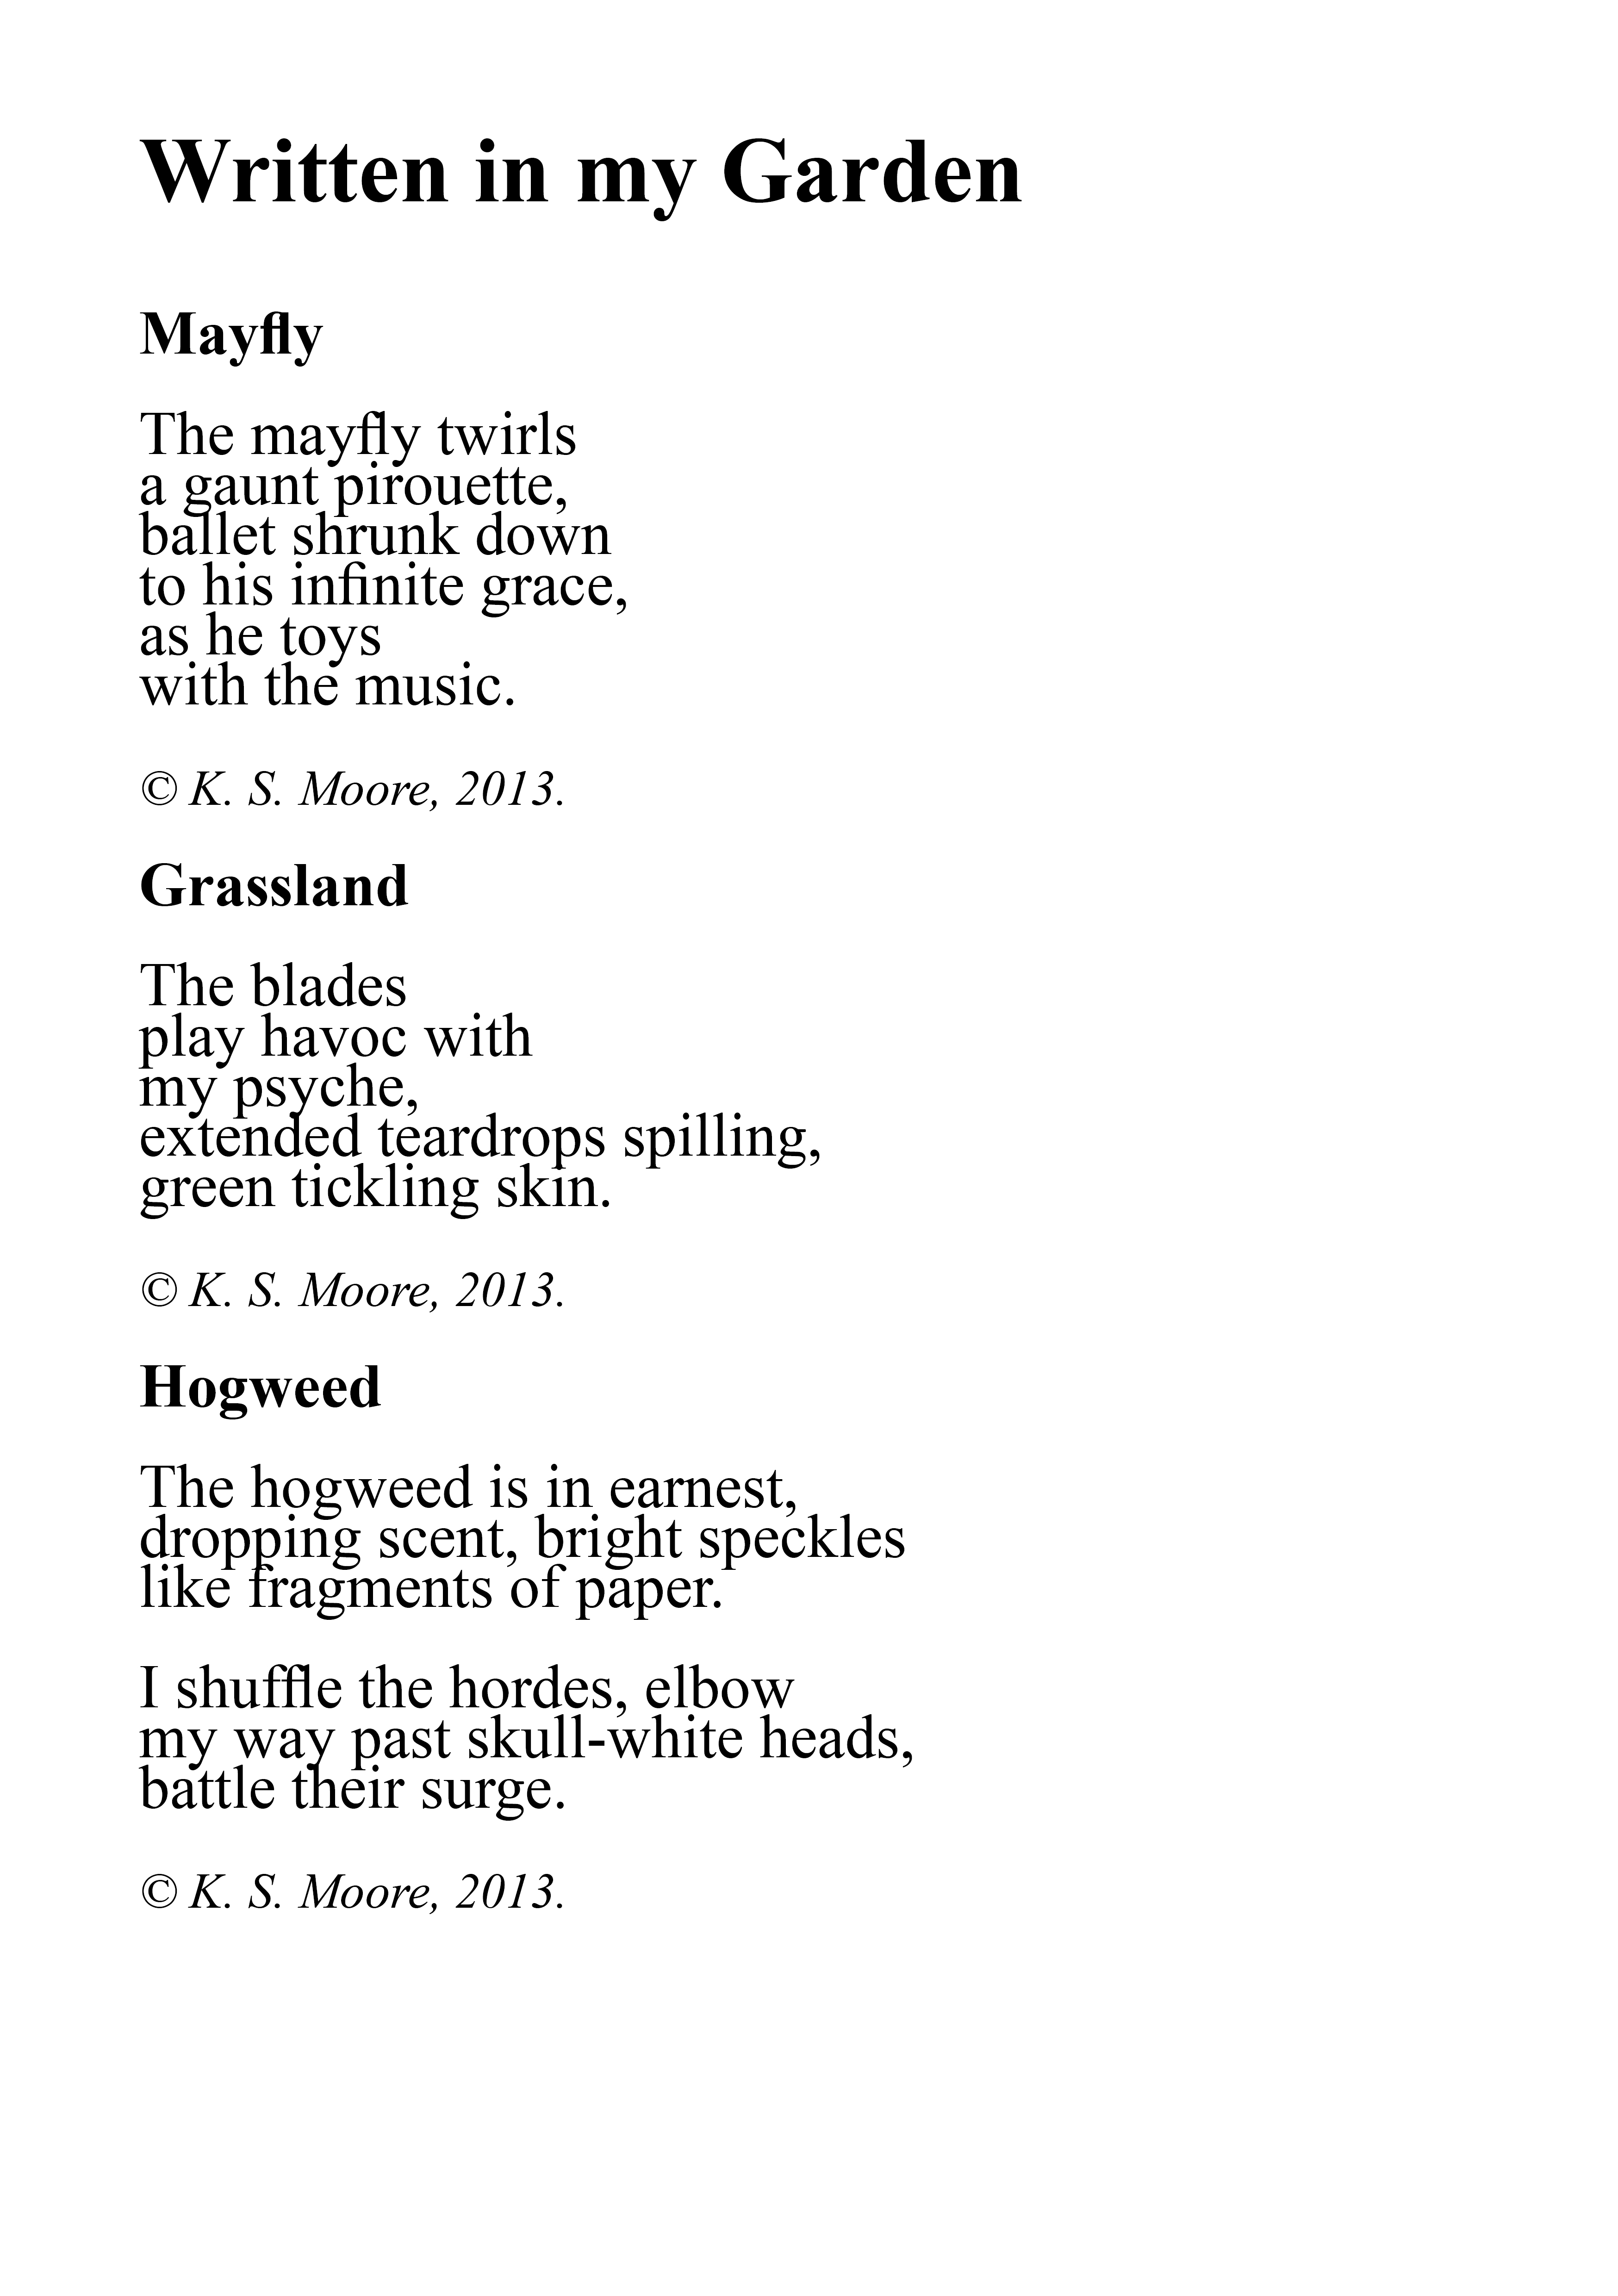 Three micropoems written by K. S. Moore.